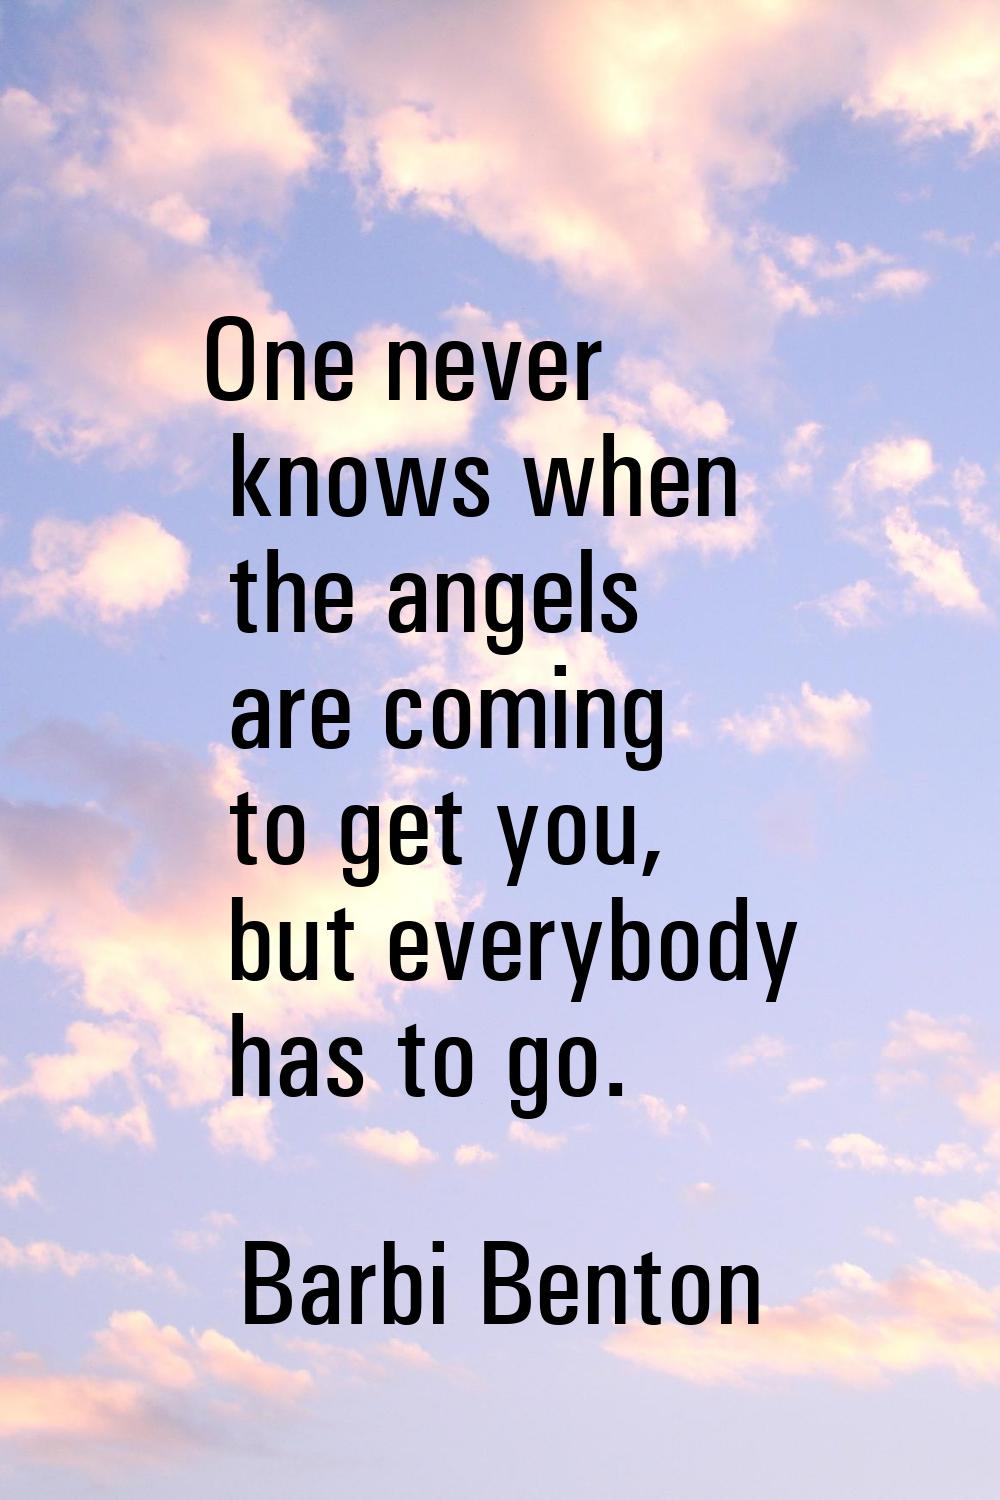 One never knows when the angels are coming to get you, but everybody has to go.